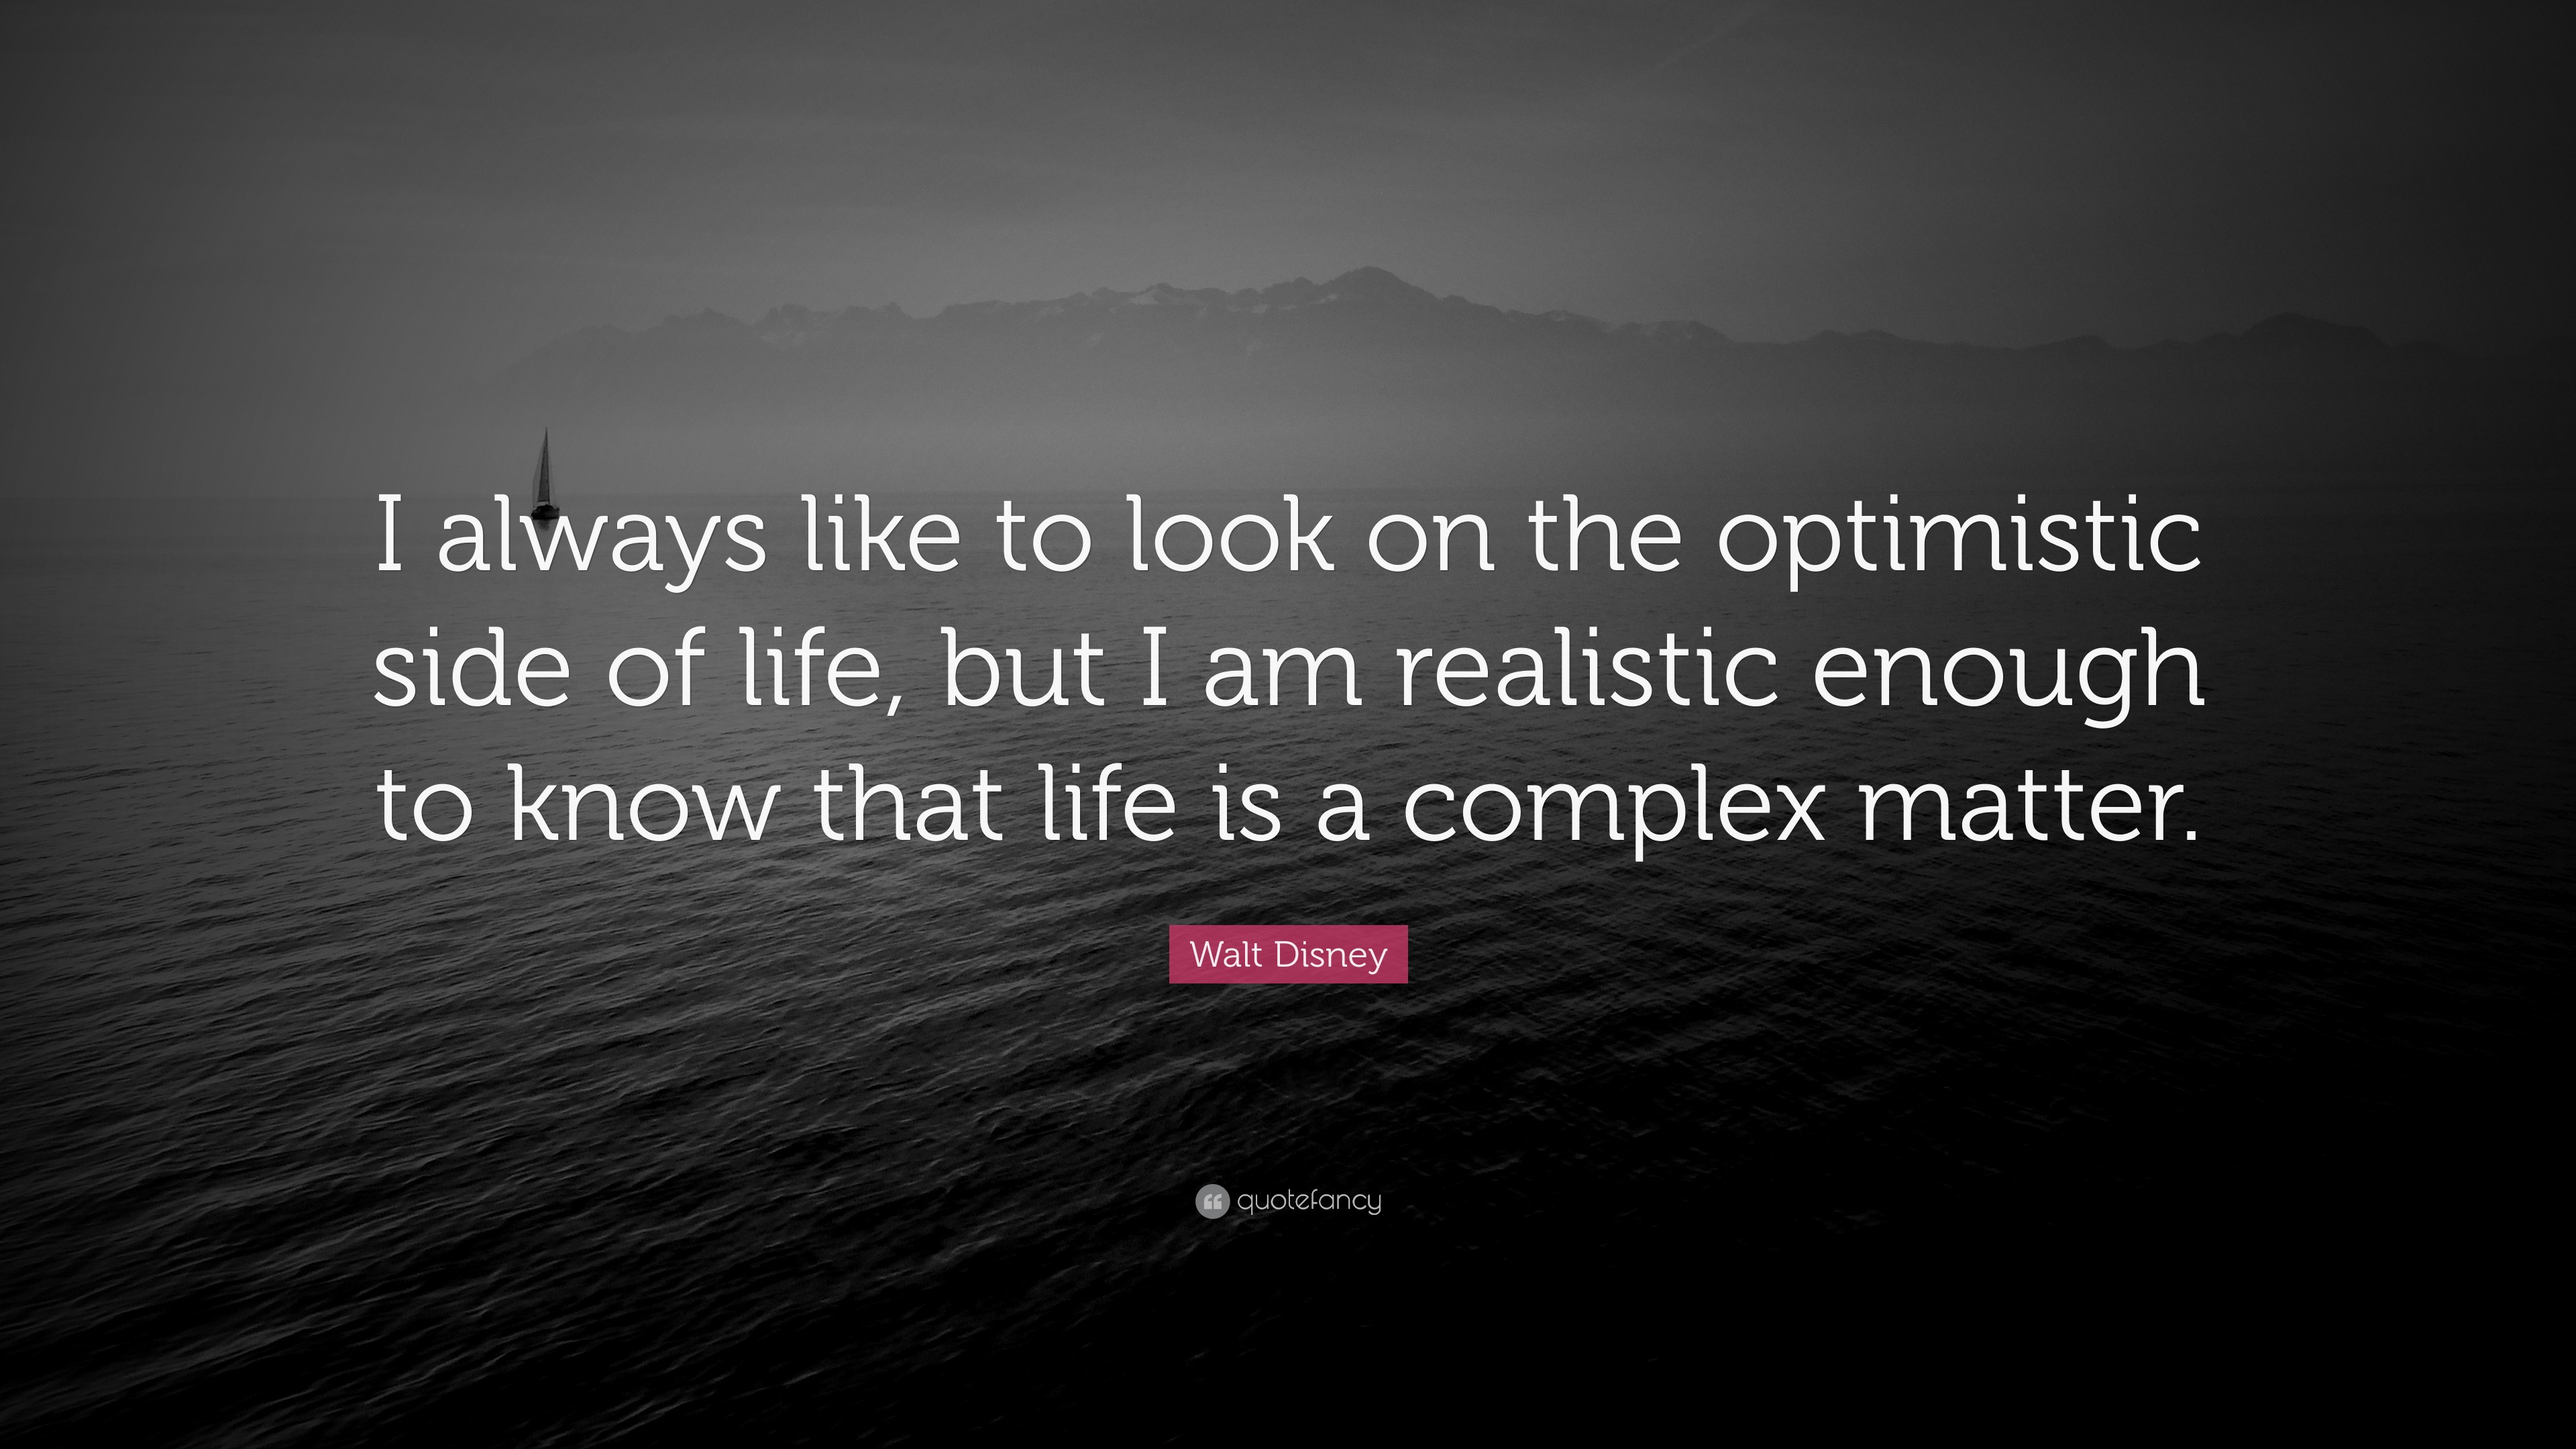 Walt Disney Quote: “I always like to look on the optimistic side of ...